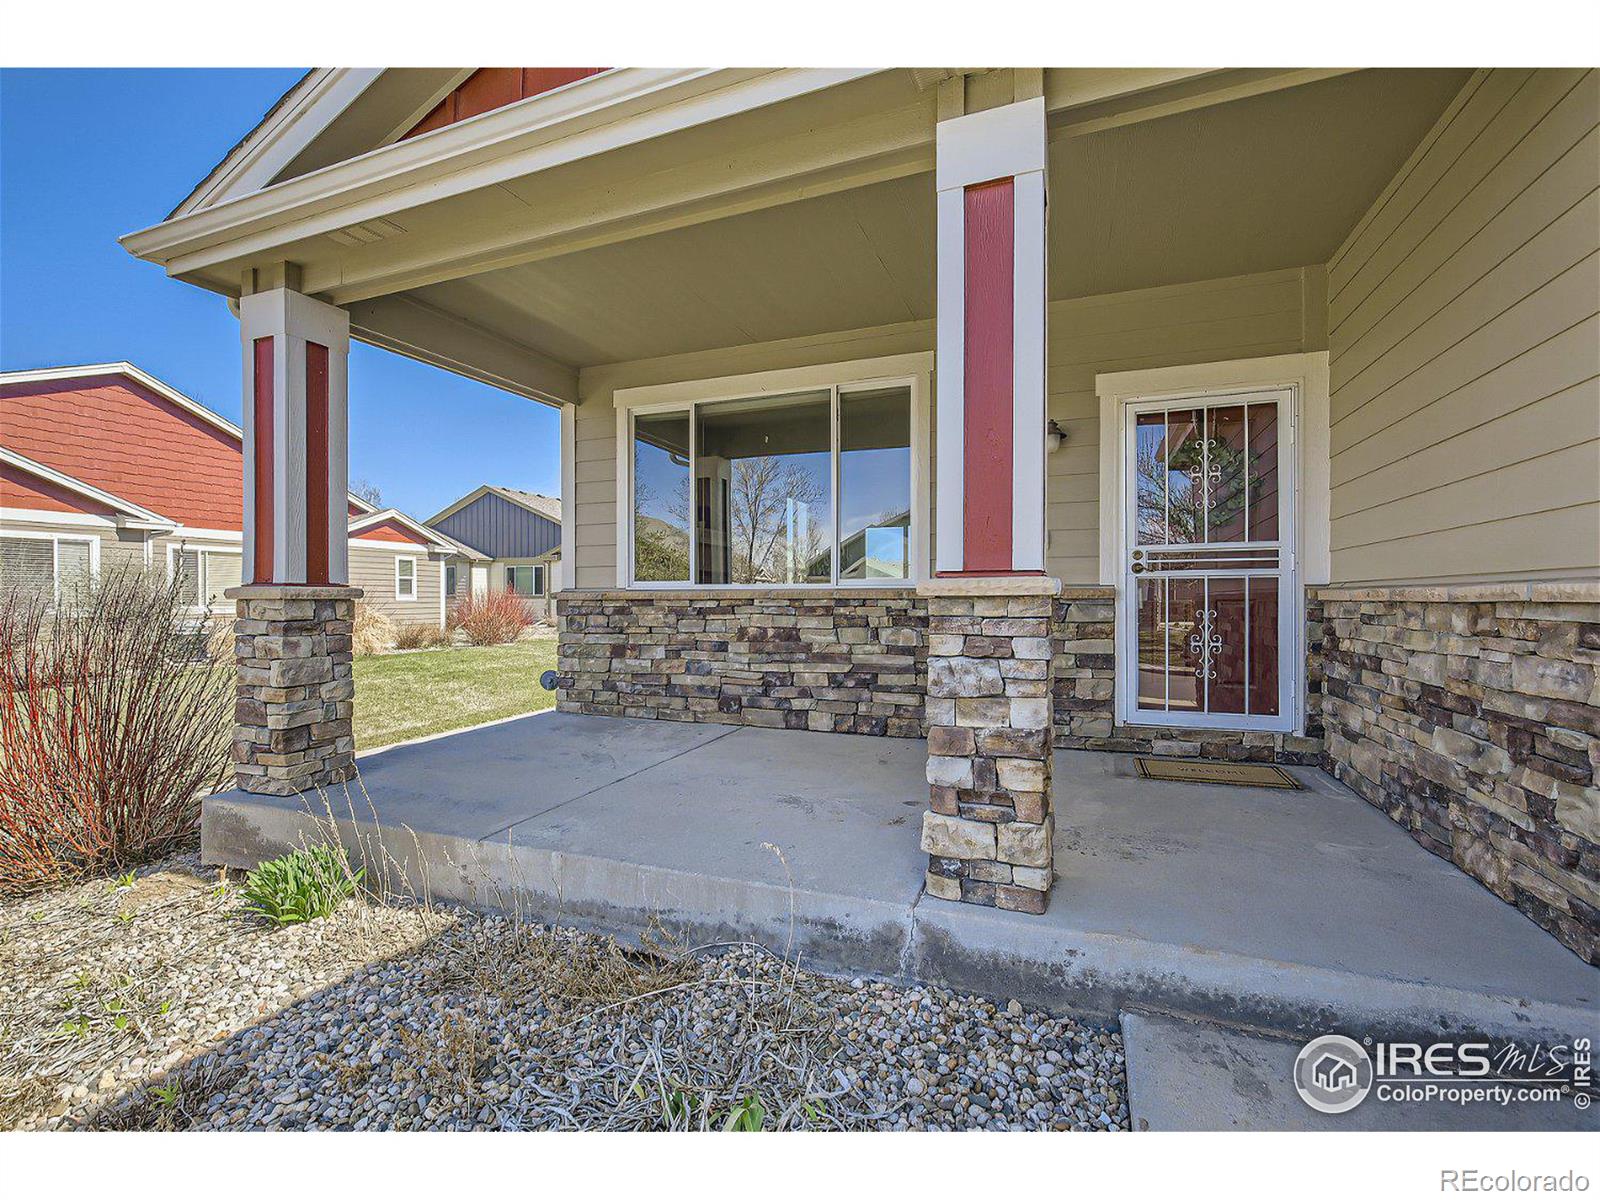 2720  dafina drive, Loveland sold home. Closed on 2024-04-25 for $484,000.